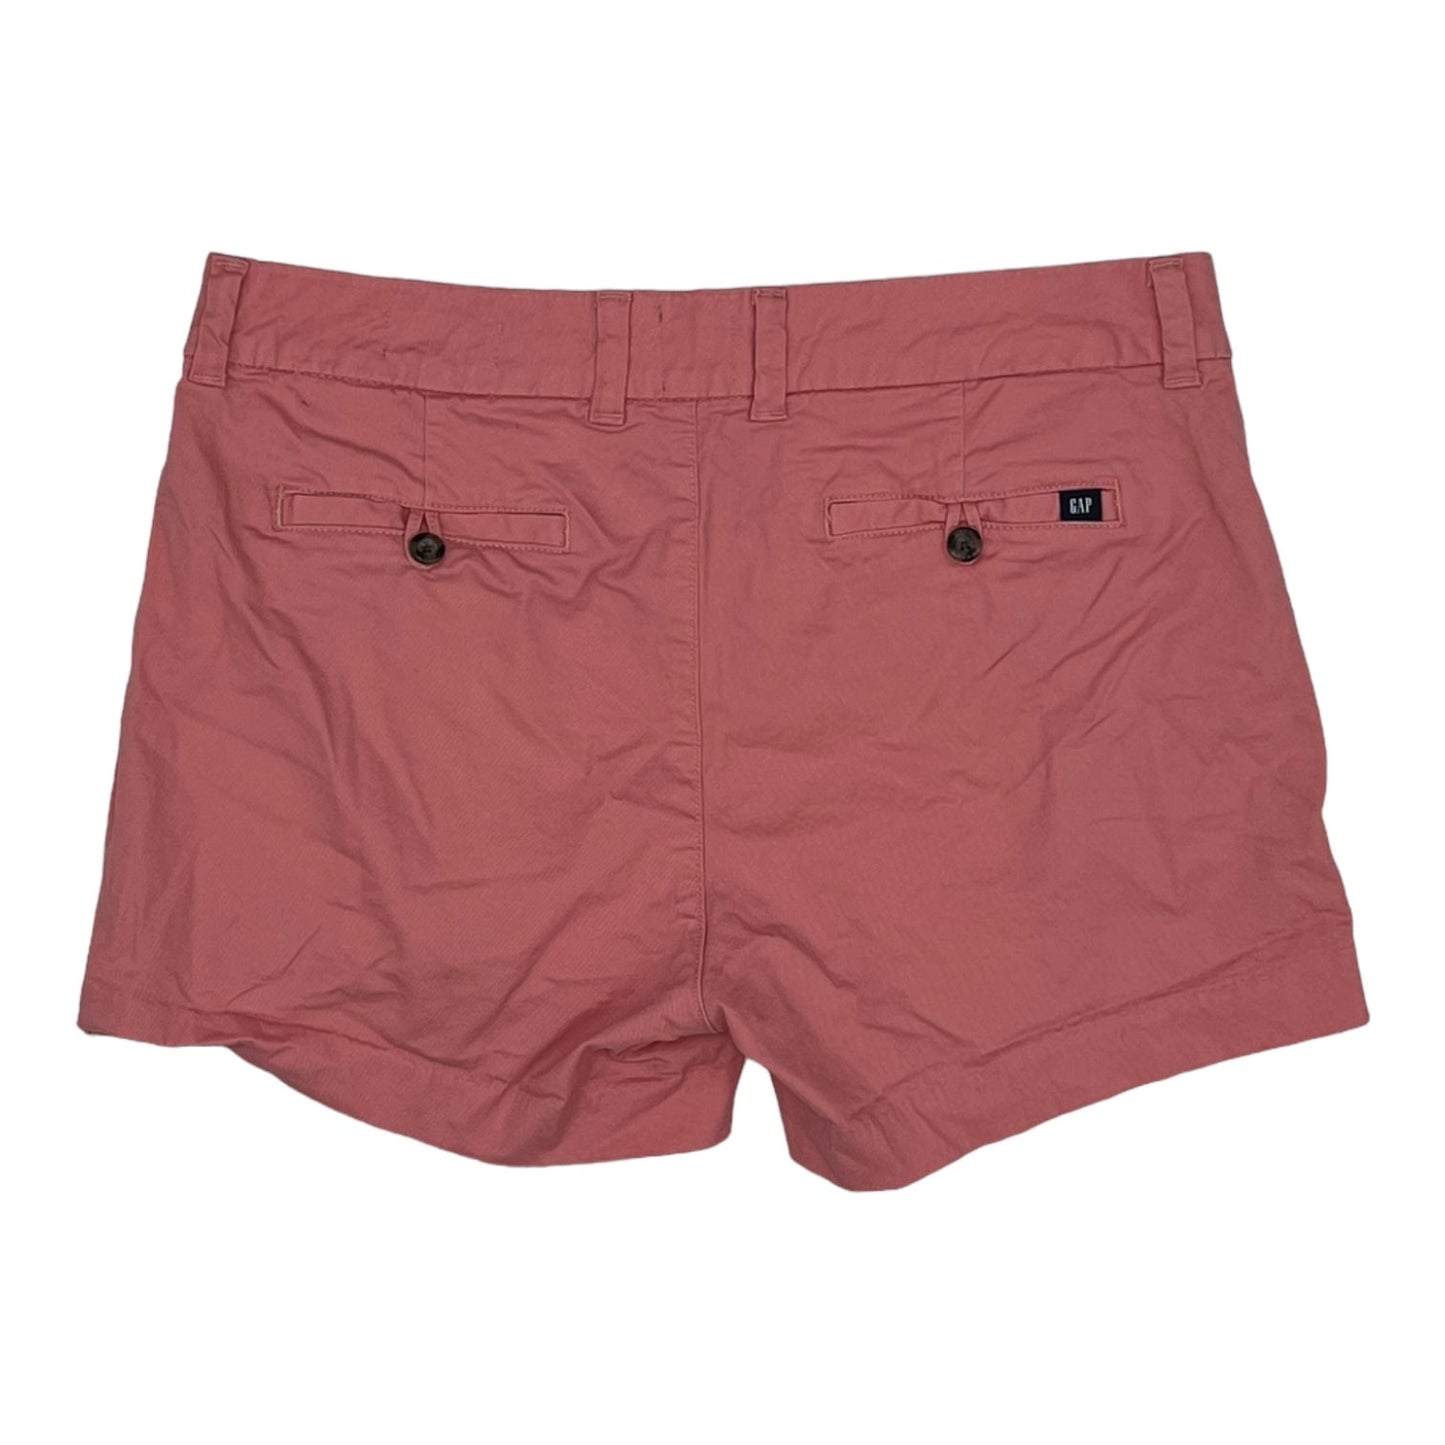 PINK SHORTS by GAP Size:10